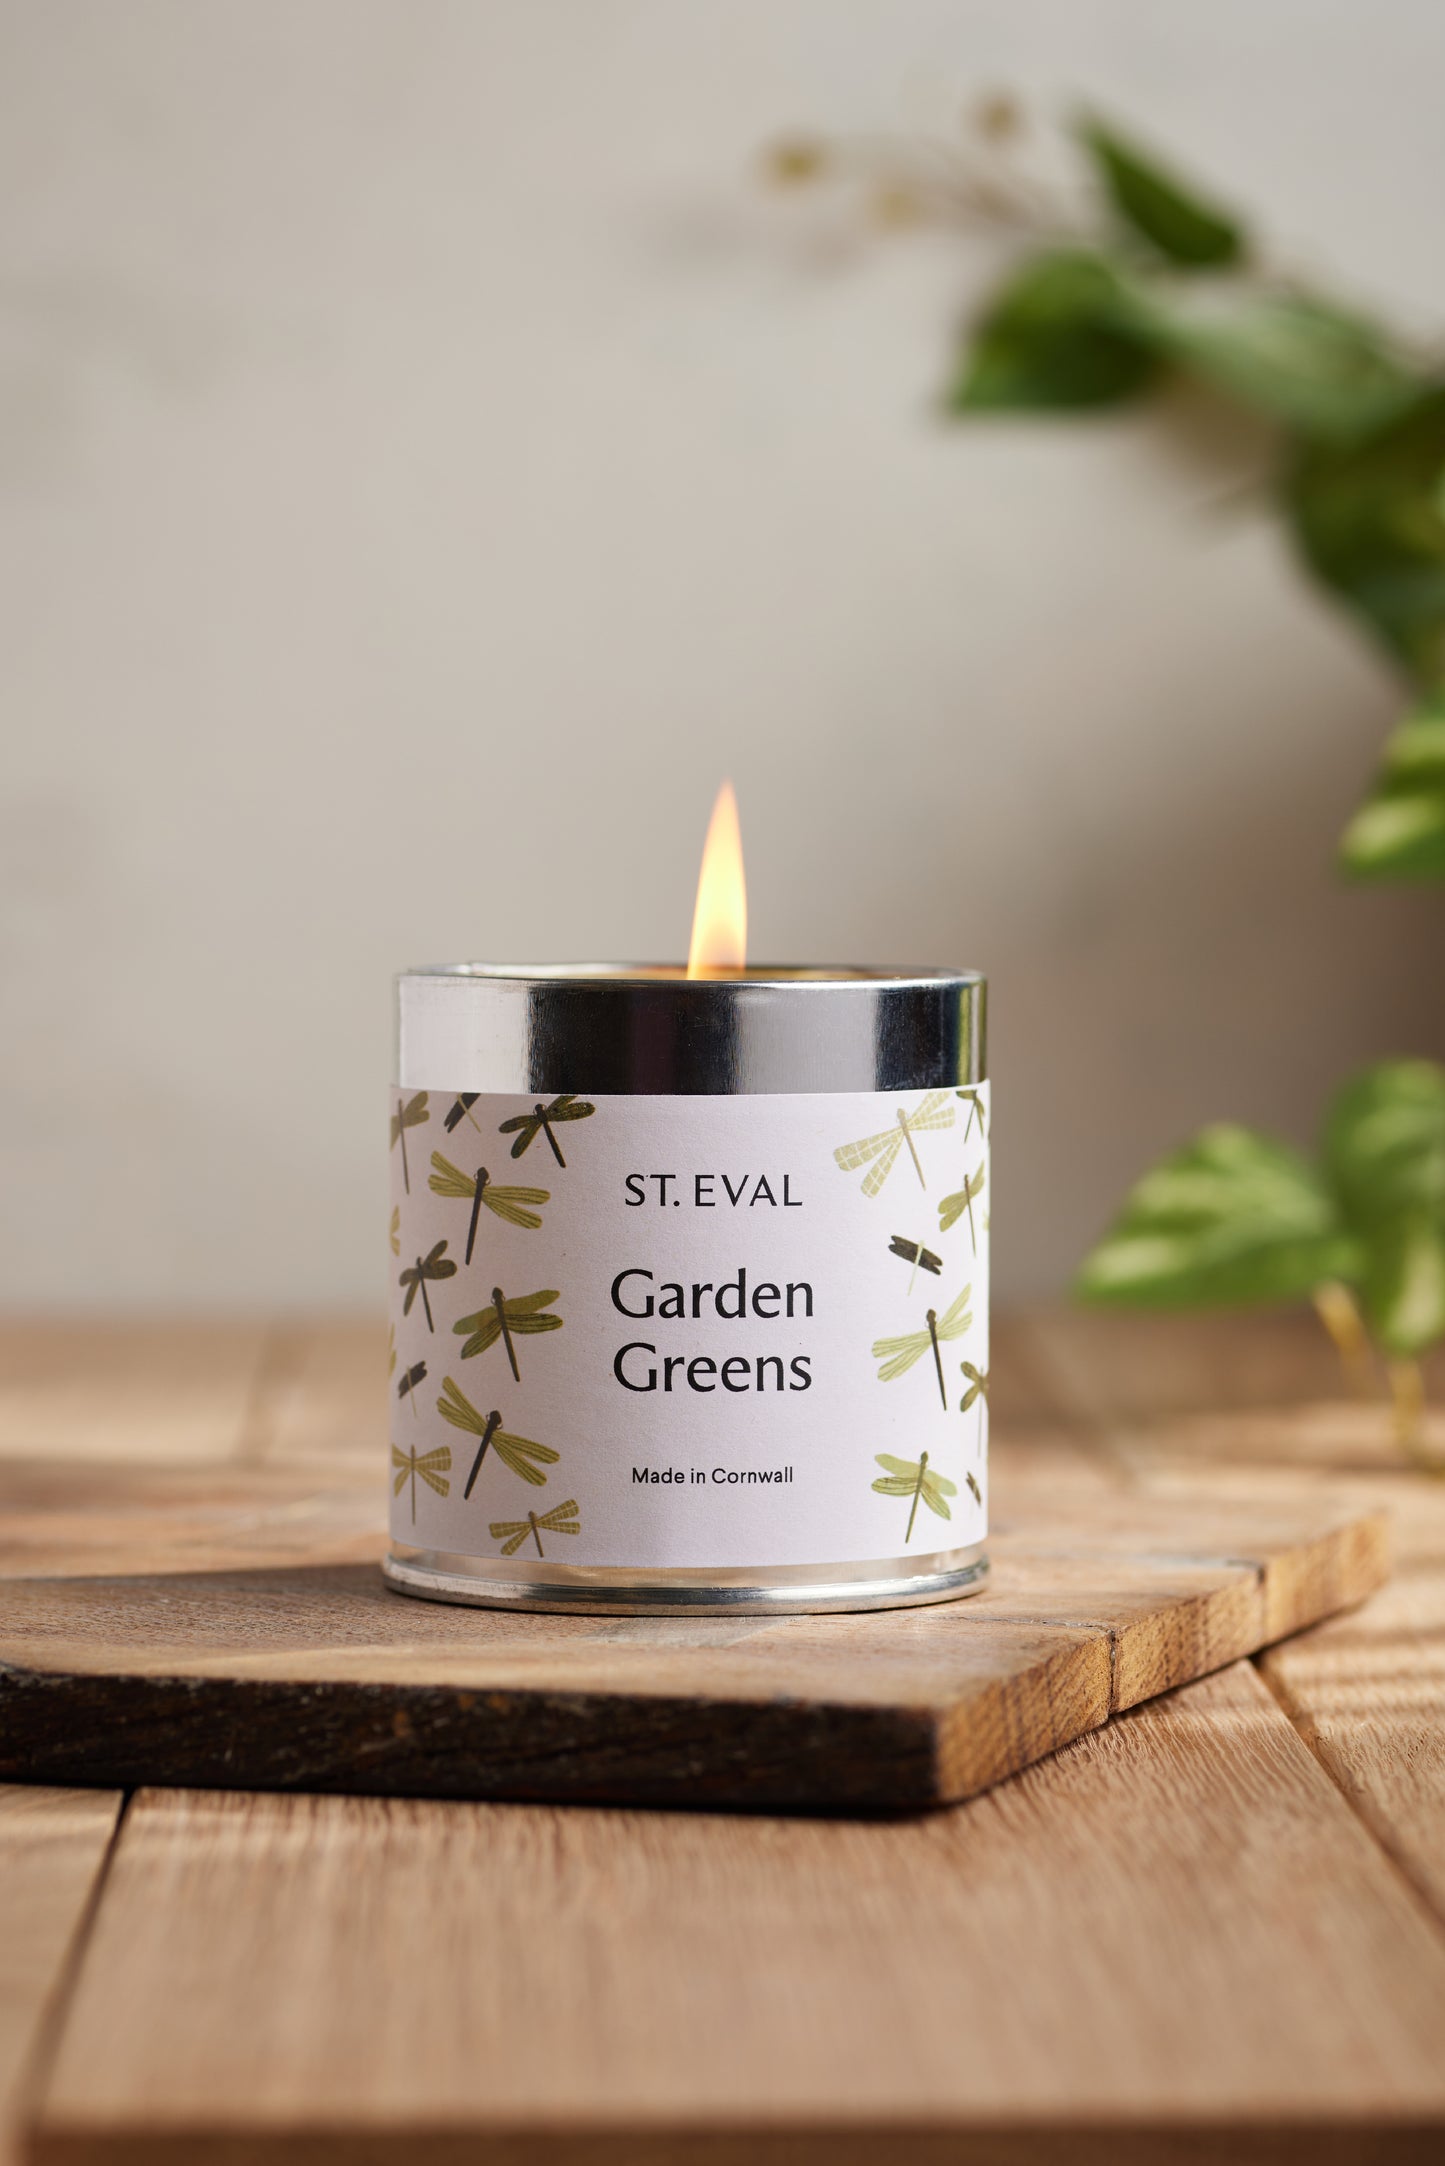 St Eval Garden Greens Scented Tin Candle